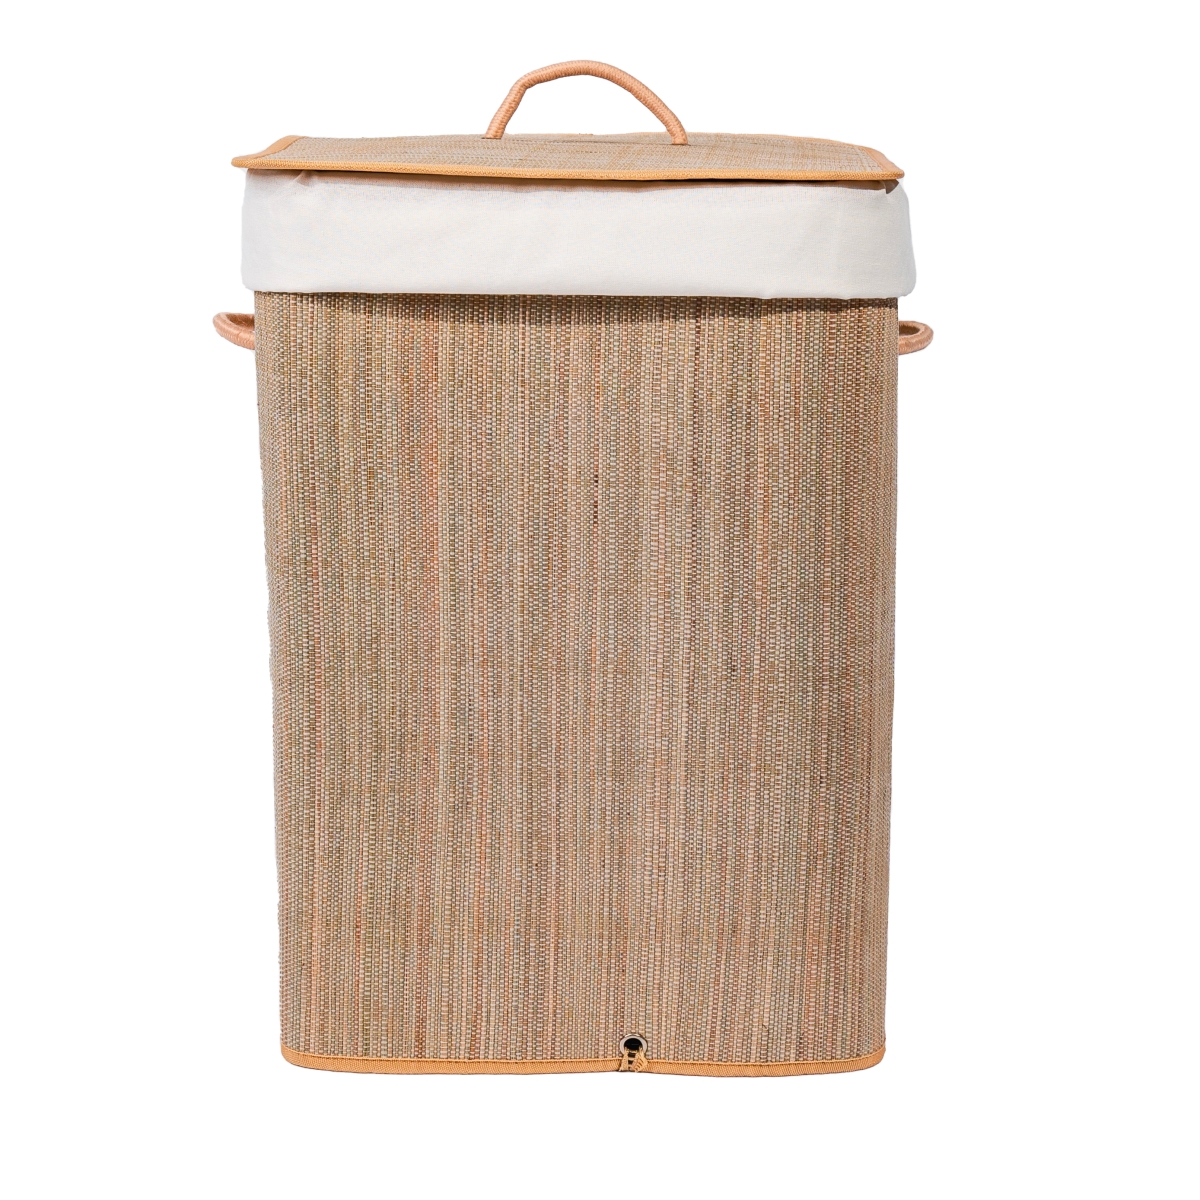 Vintiquewise QI004430-G_SQ Rectangle Mendong Bamboo Laundry Hamper with Lid and Handles for Easy Carrying